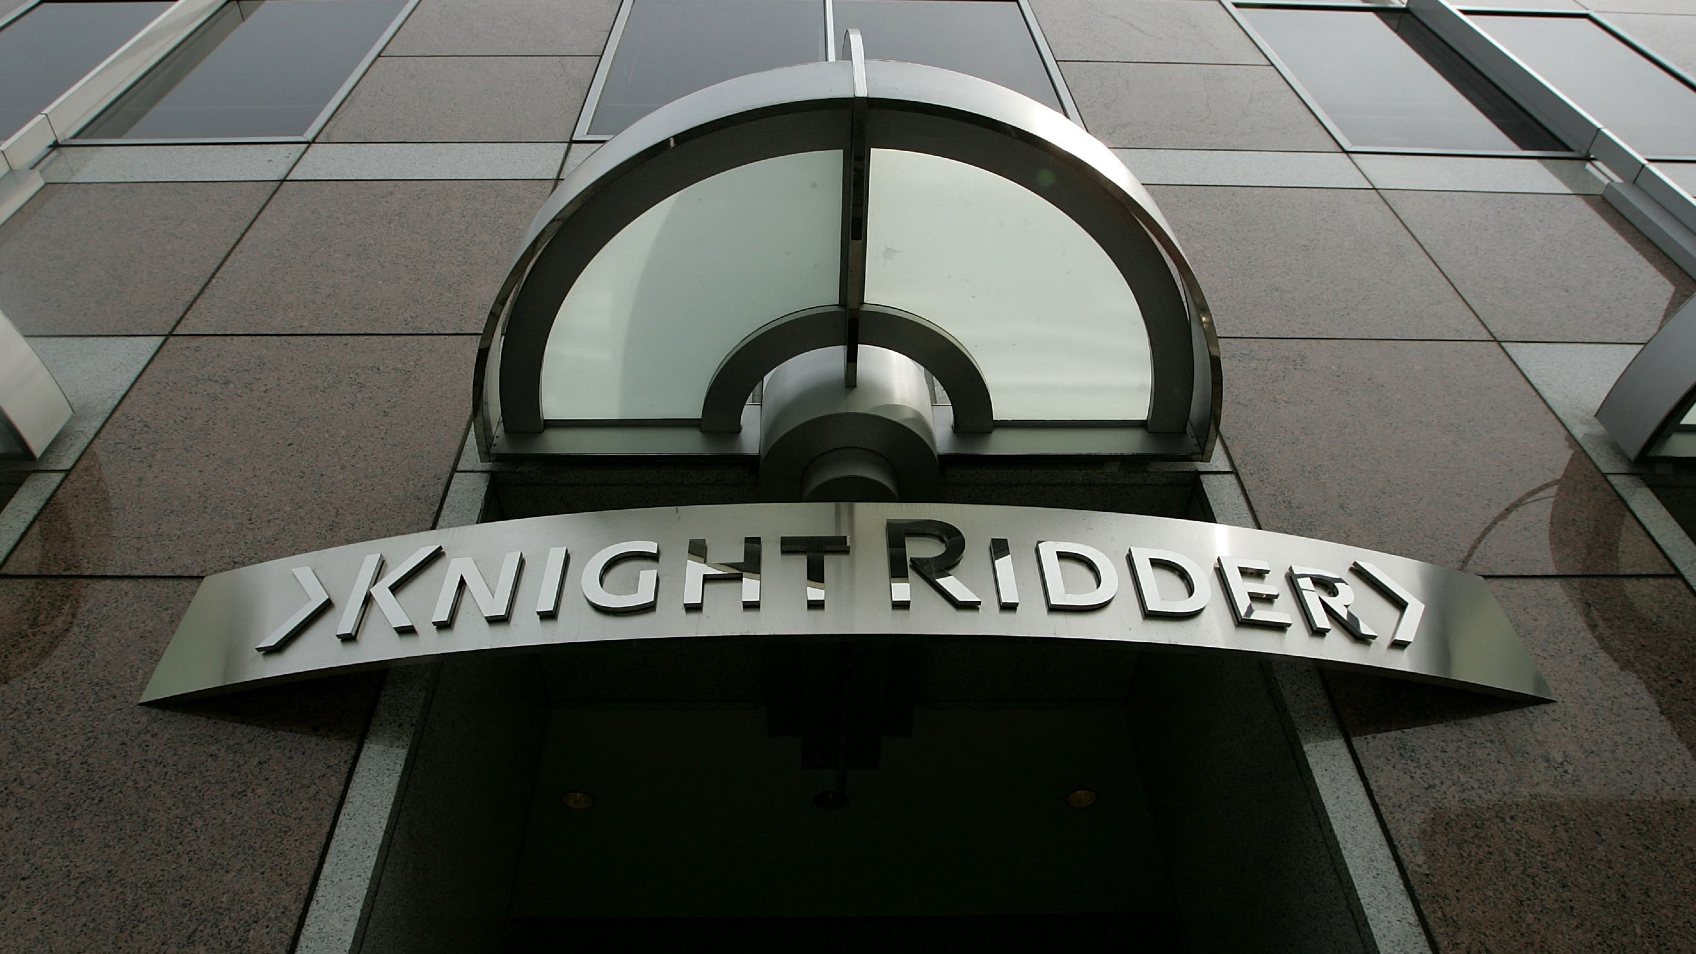 Knight Ridder was one of the largest newspaper companies in the US during the early 2000s.